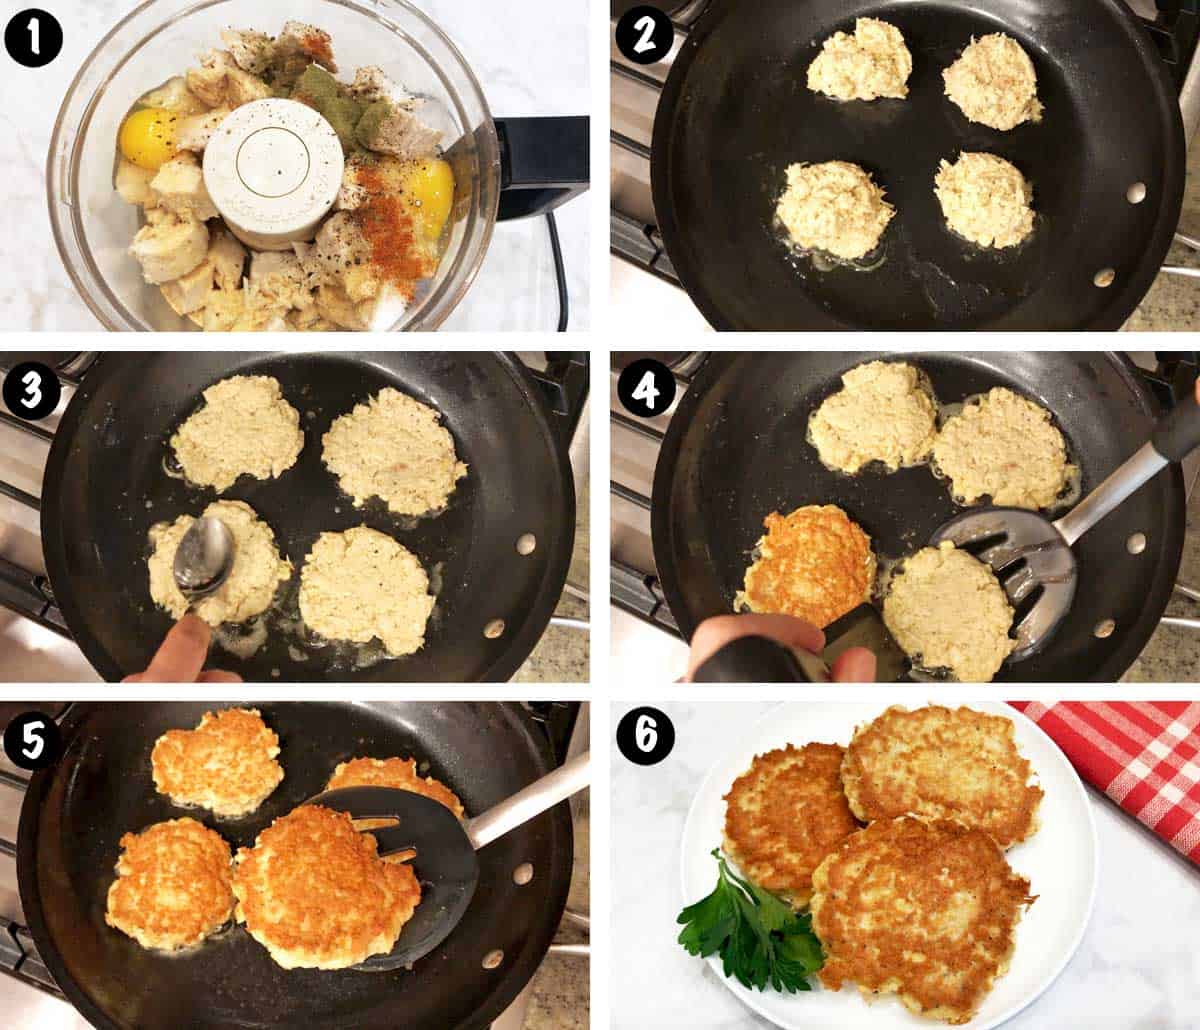 A six-photo collage showing the steps for making chicken patties.